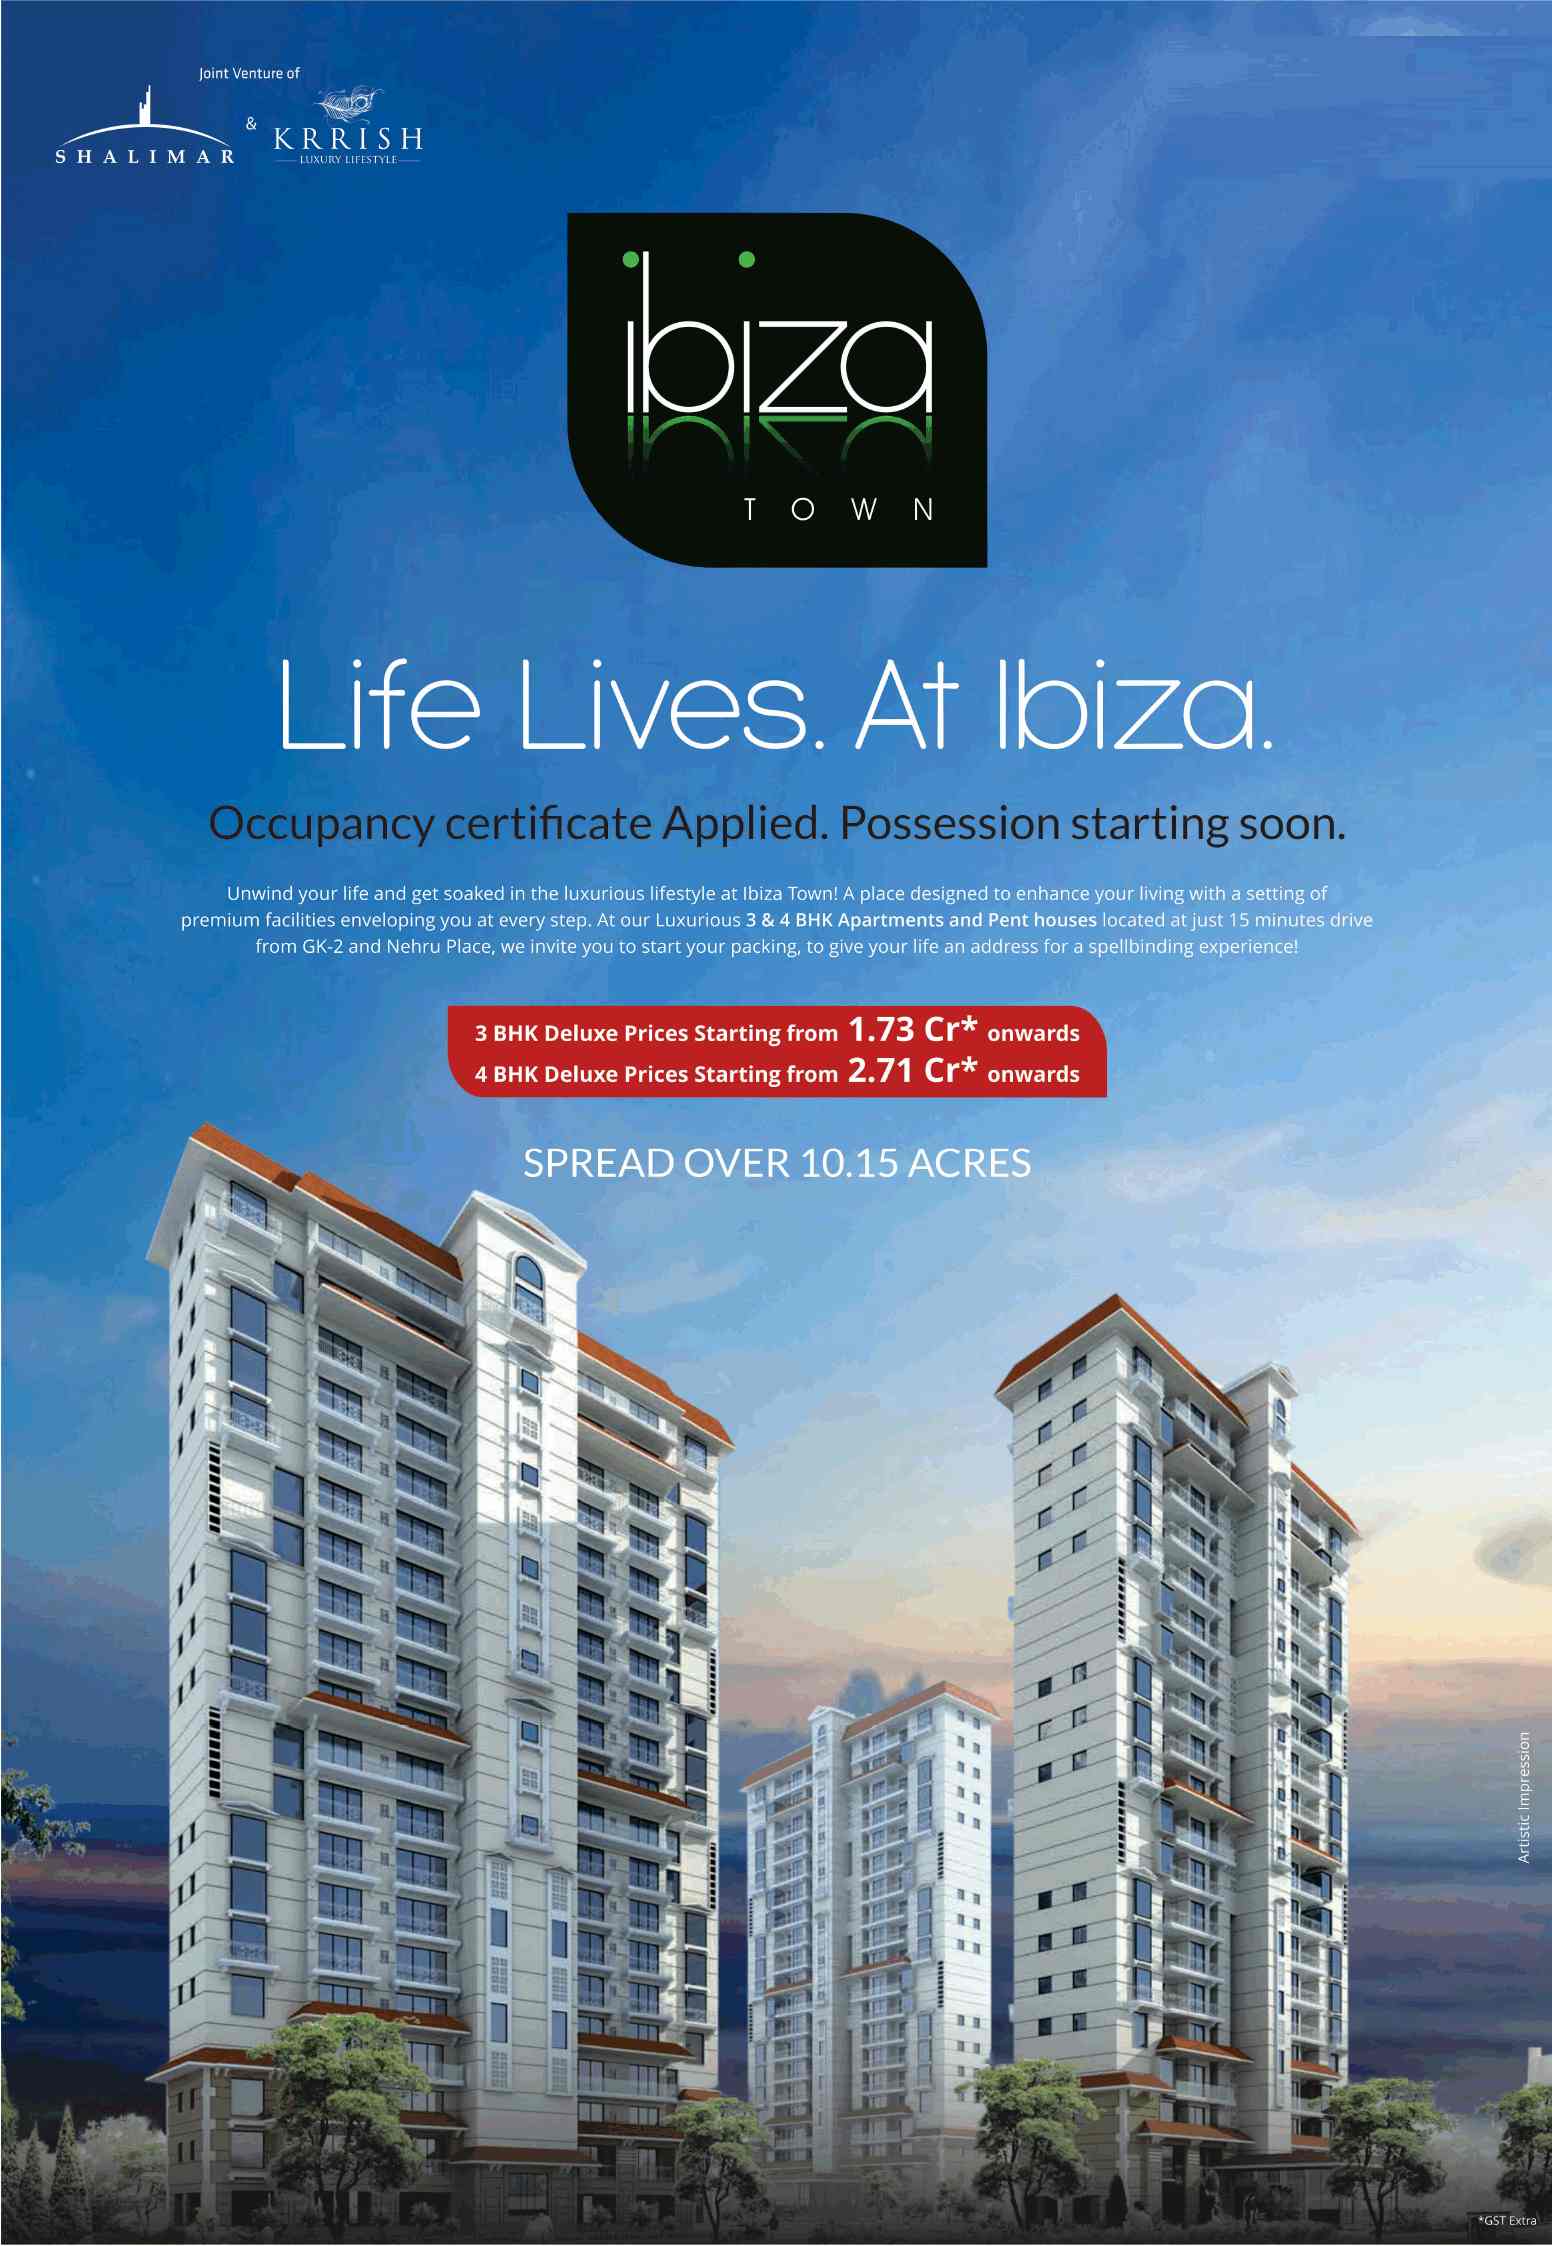 Krrish Shalimar Ibiza Town invites you to give your life an address for a spellbinding experience in Faridabad